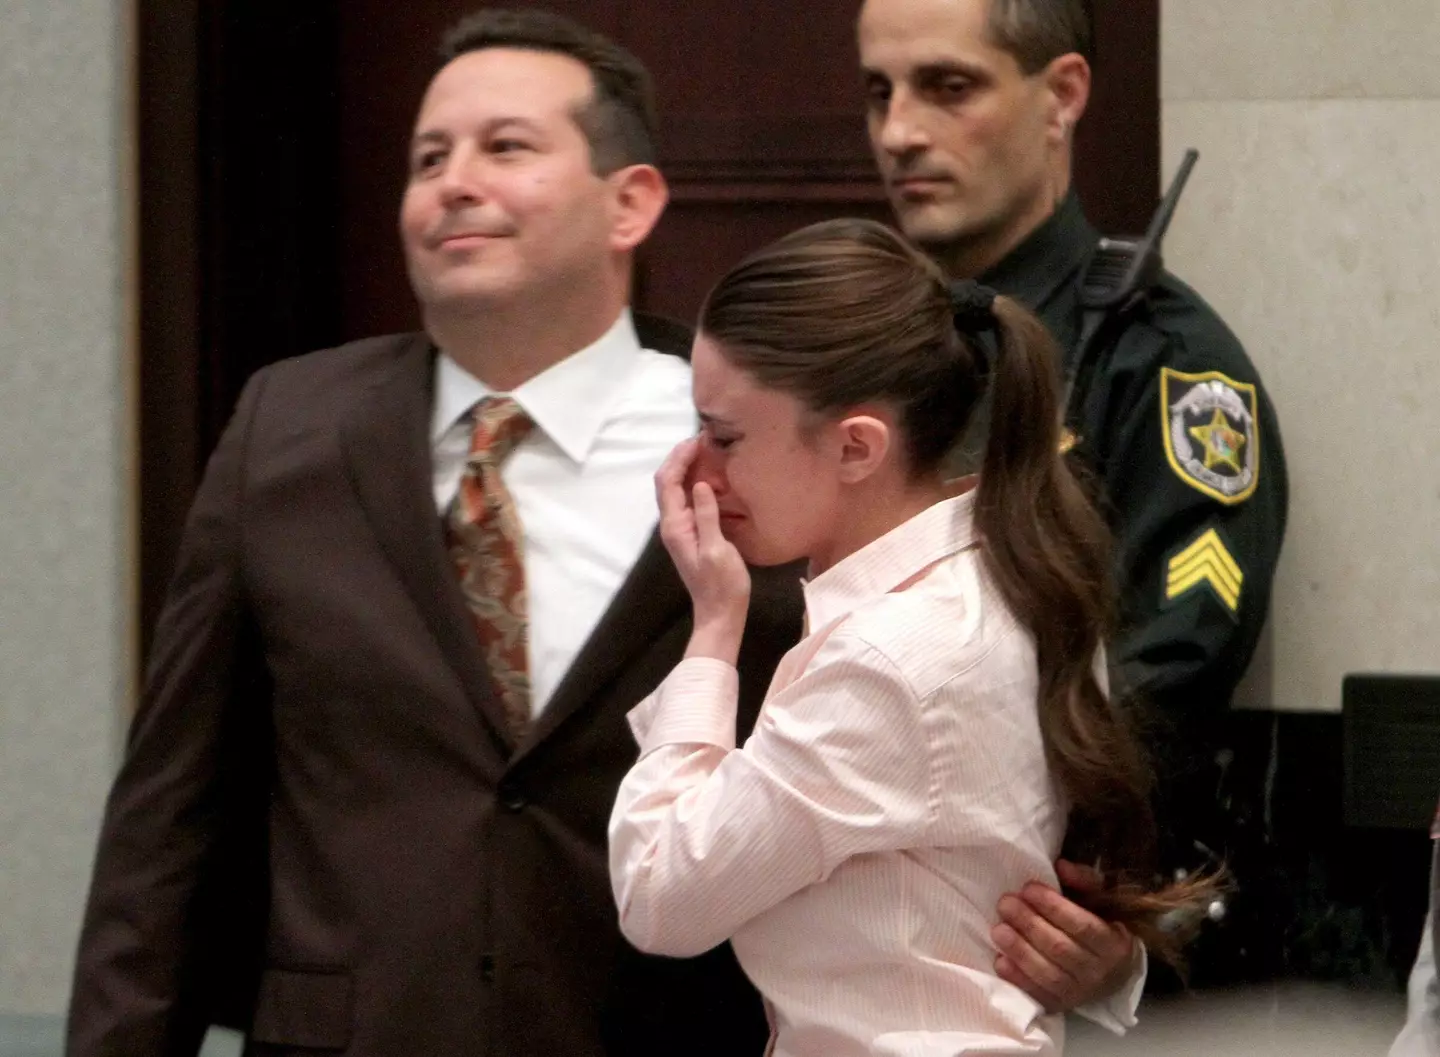 Anthony was acquitted in 2011.